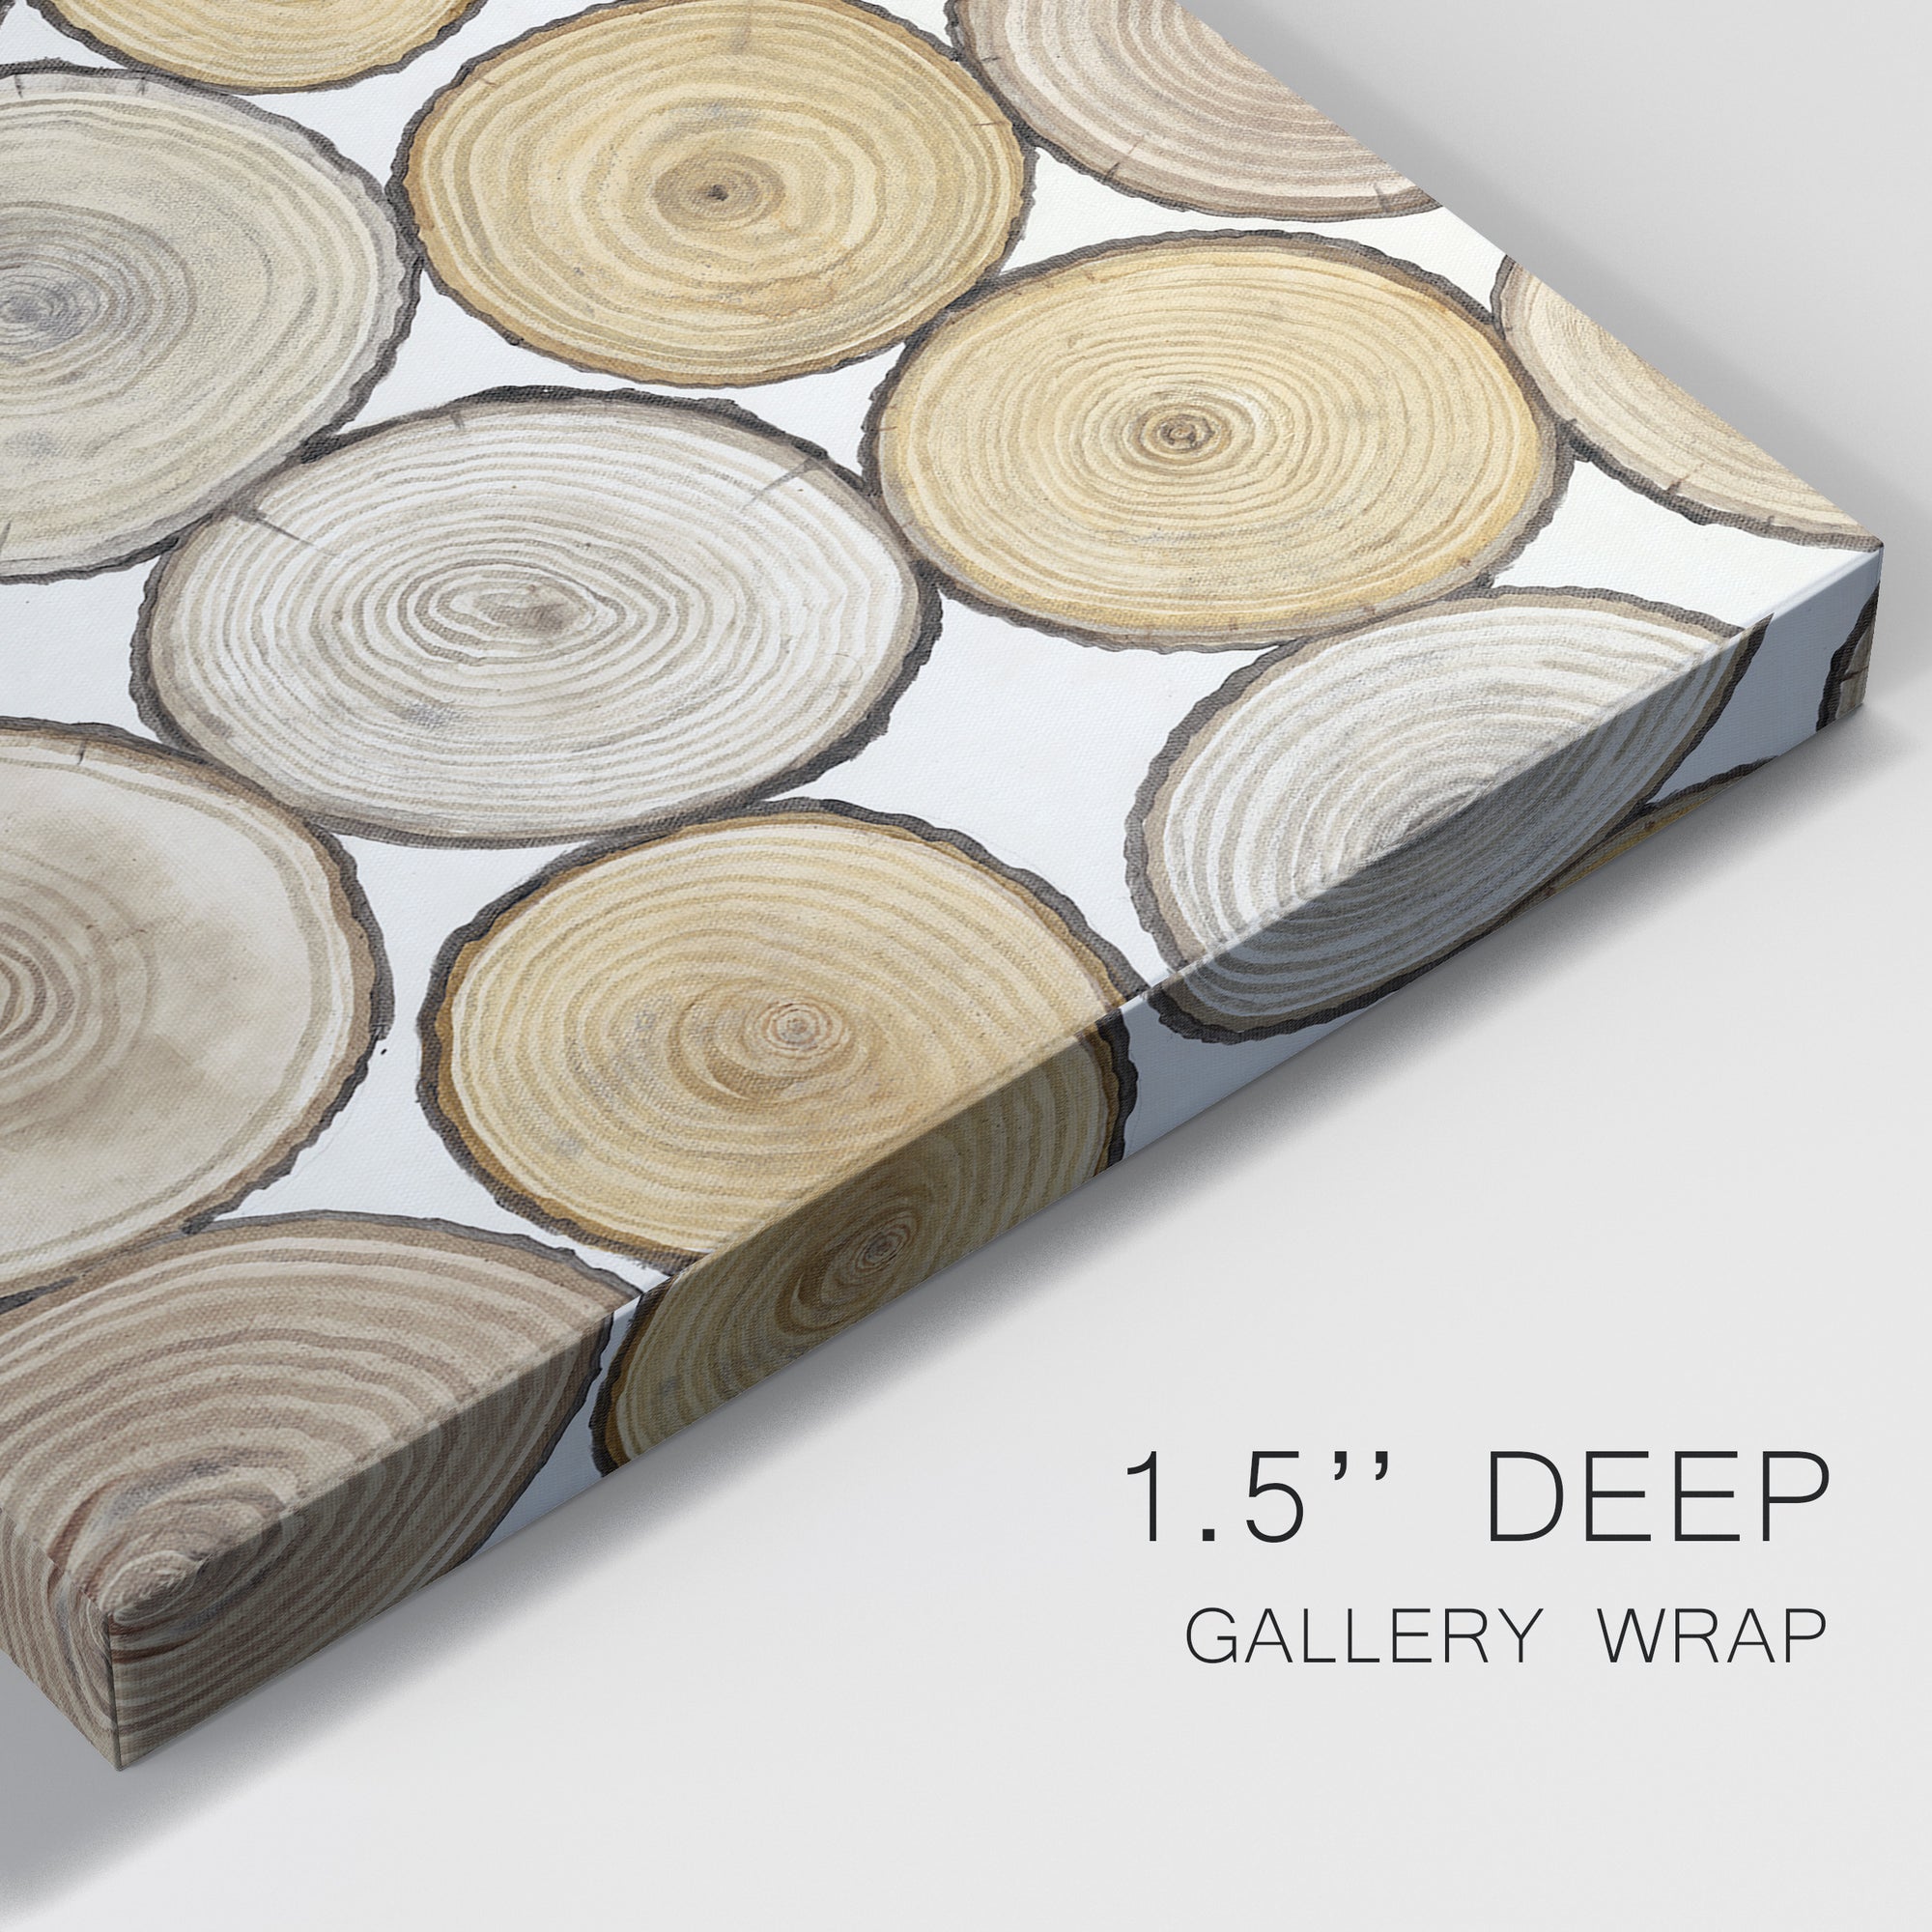 Tree Ring Study I Premium Gallery Wrapped Canvas - Ready to Hang